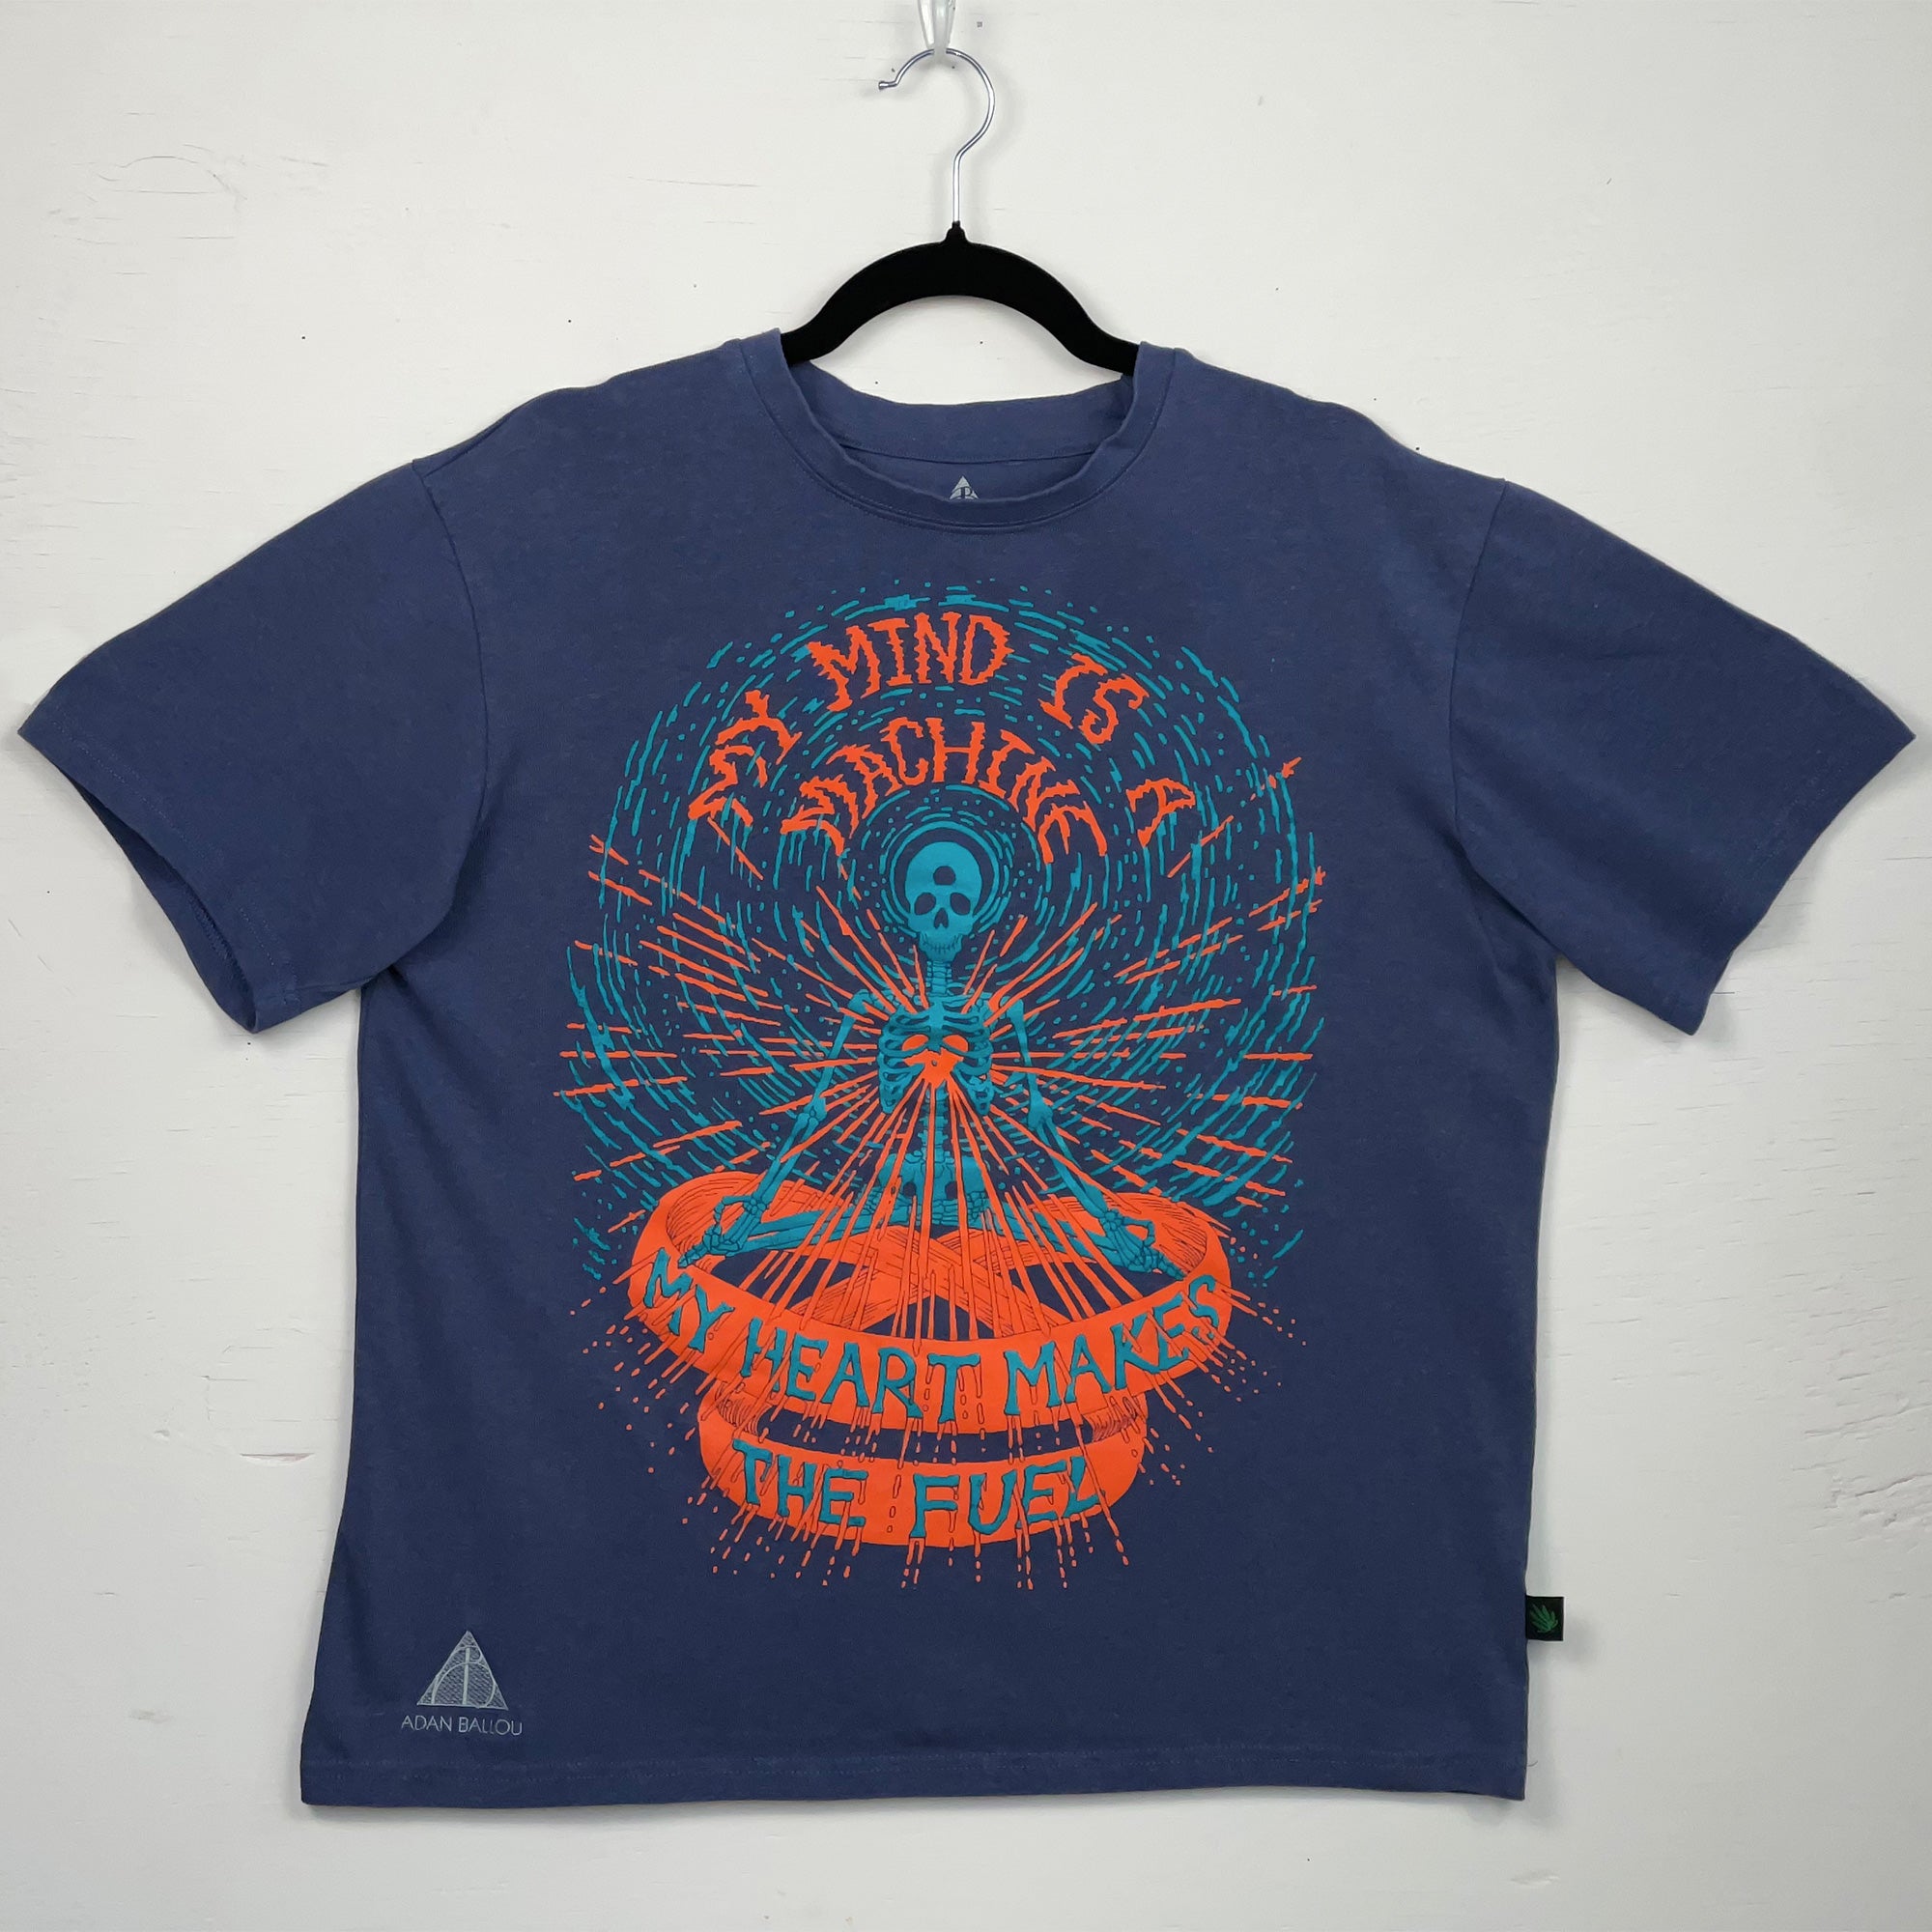 My Mind is a Machine, My Heart Makes the Fuel Navy Tee